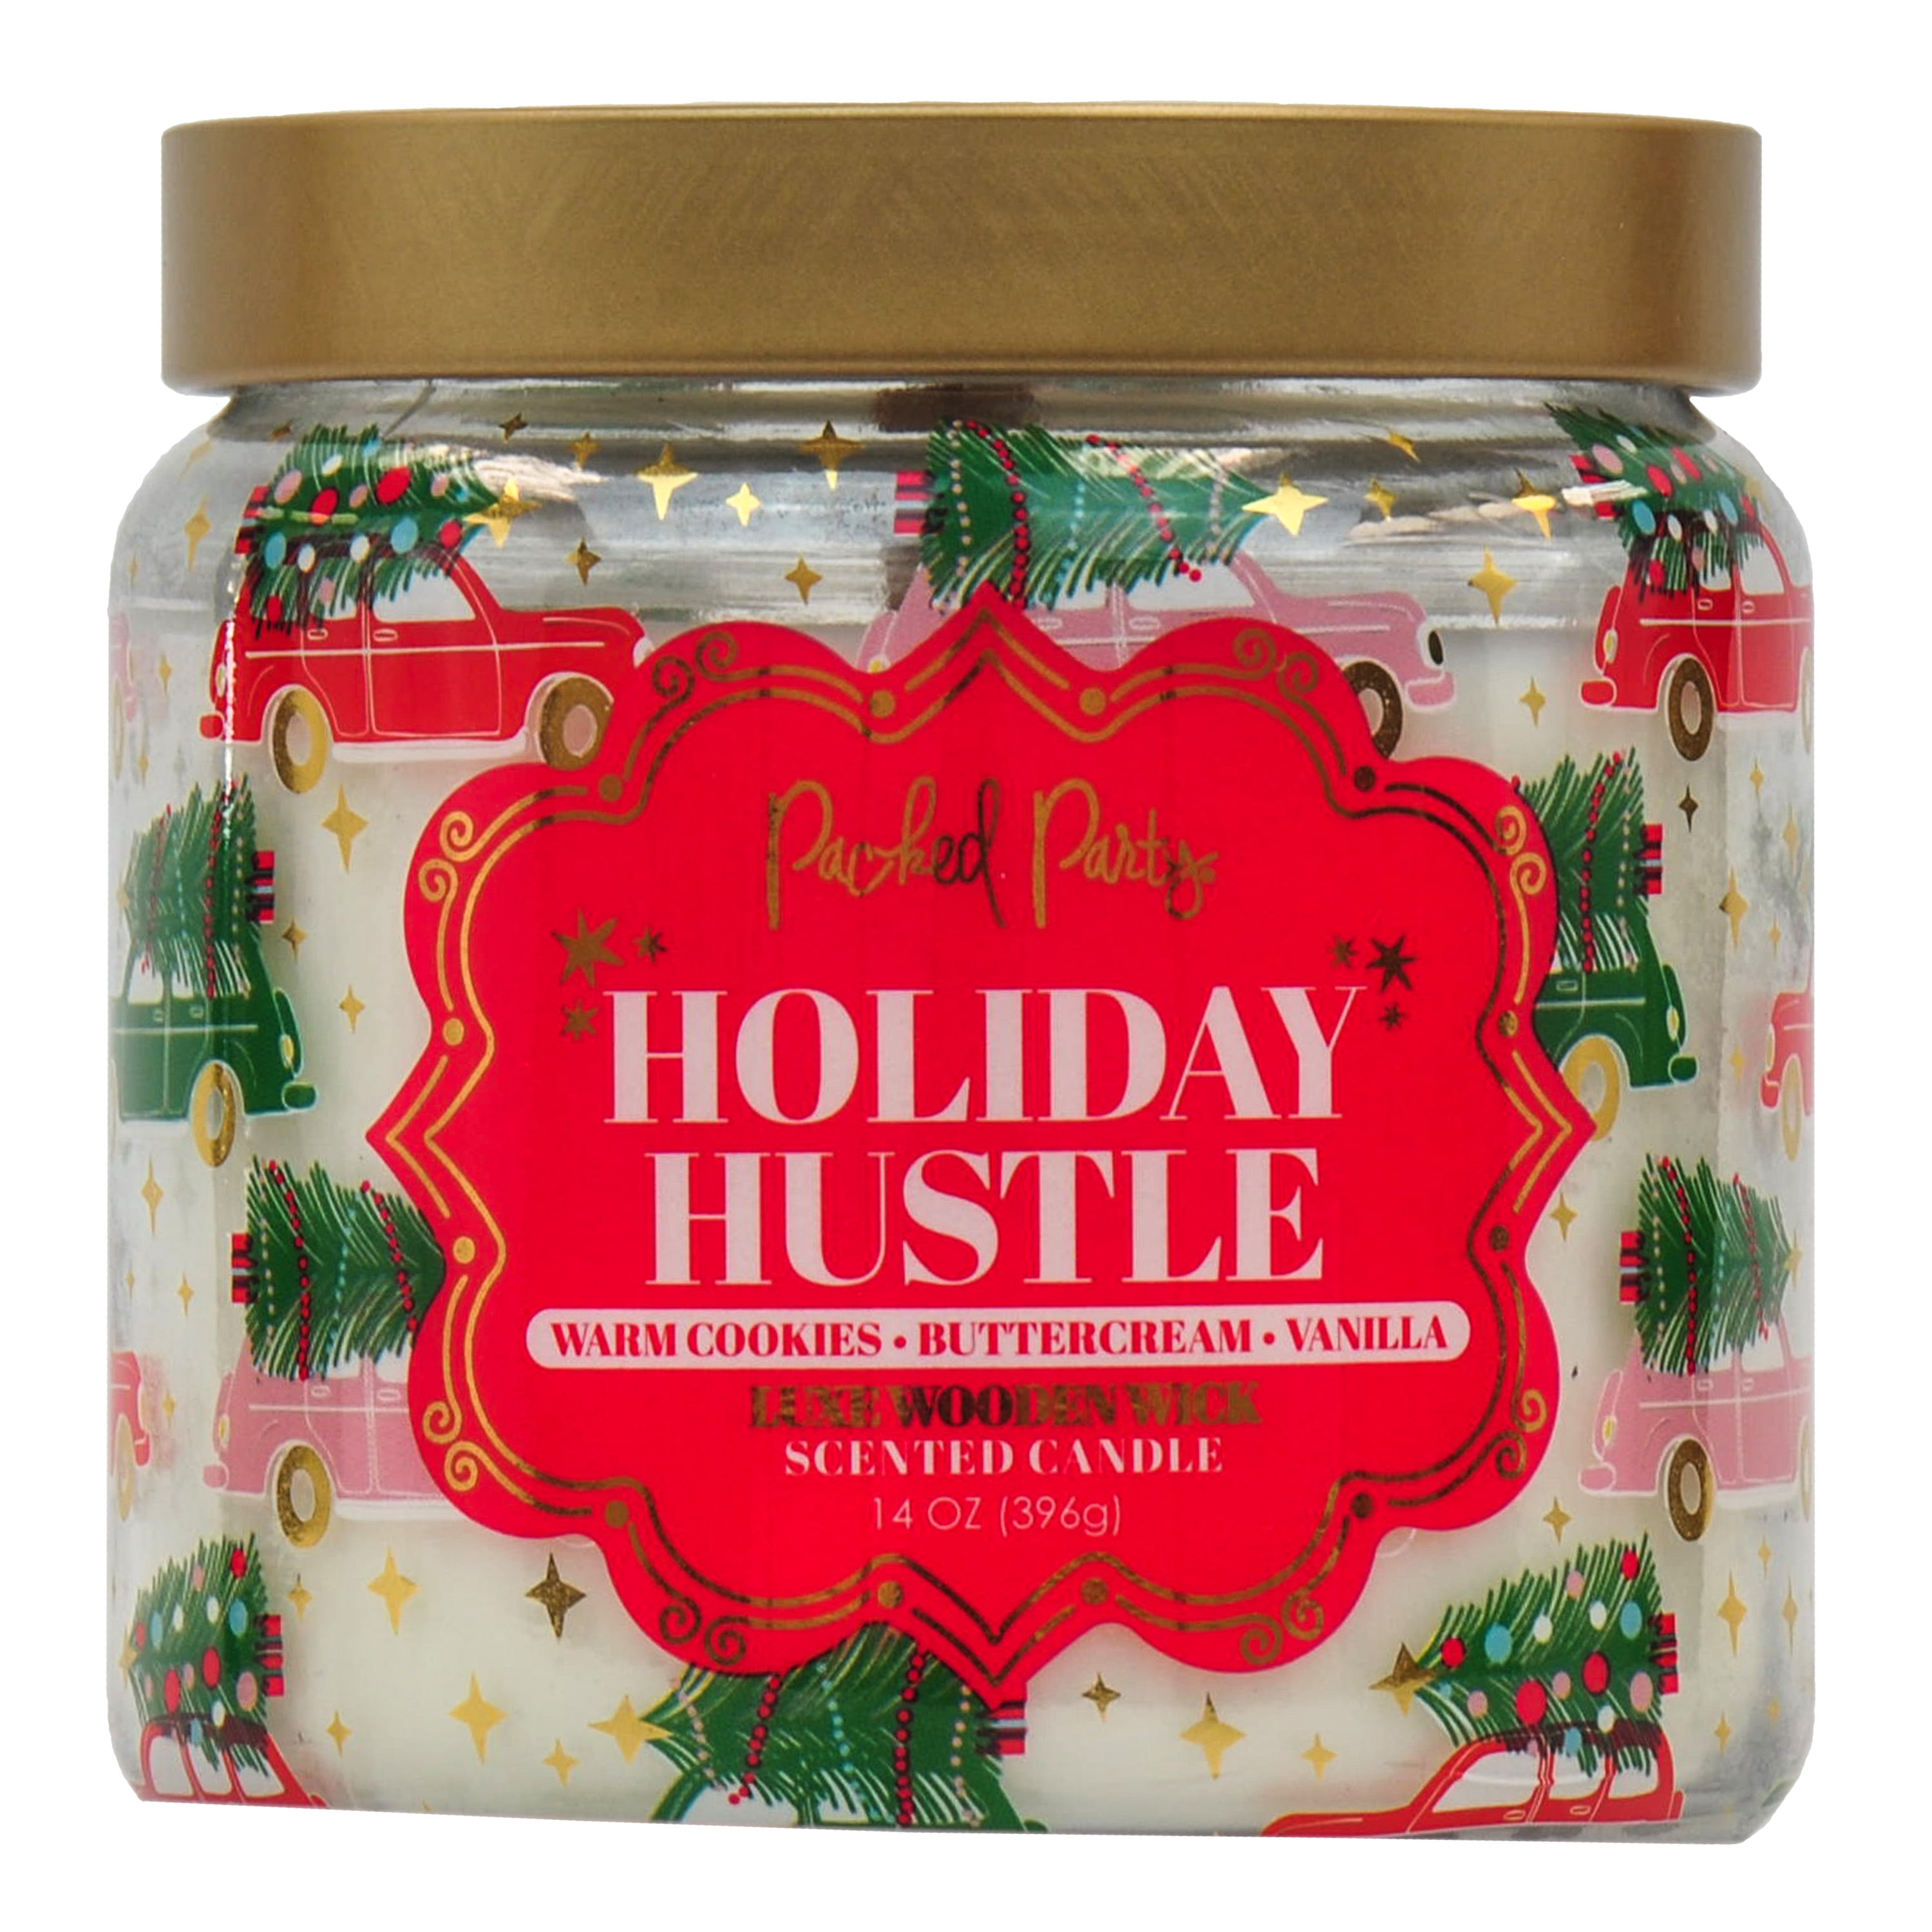 Packed Party Hustle Wrapped candle with Wood Wick, 14-Ounce